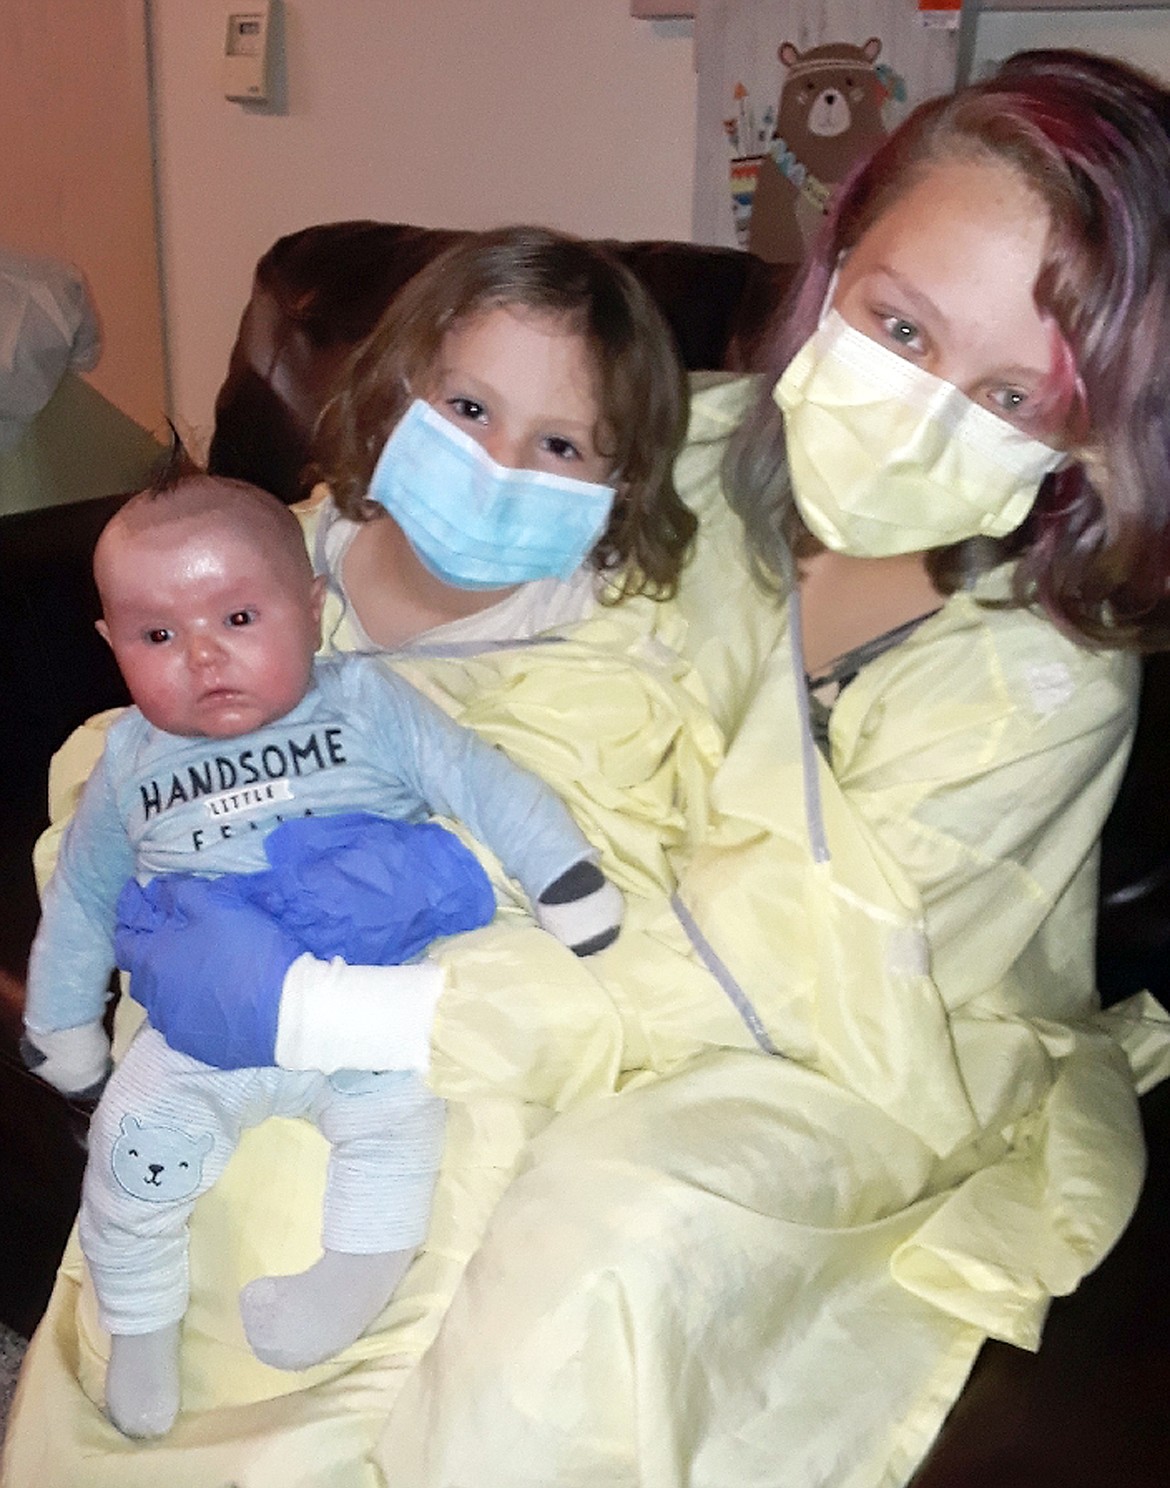 Siblings Kai, Shailyn and Rayden Darby together for the first time. Masks and gowns have kept and were keeping Rayden protected and safe long before COVID came about.